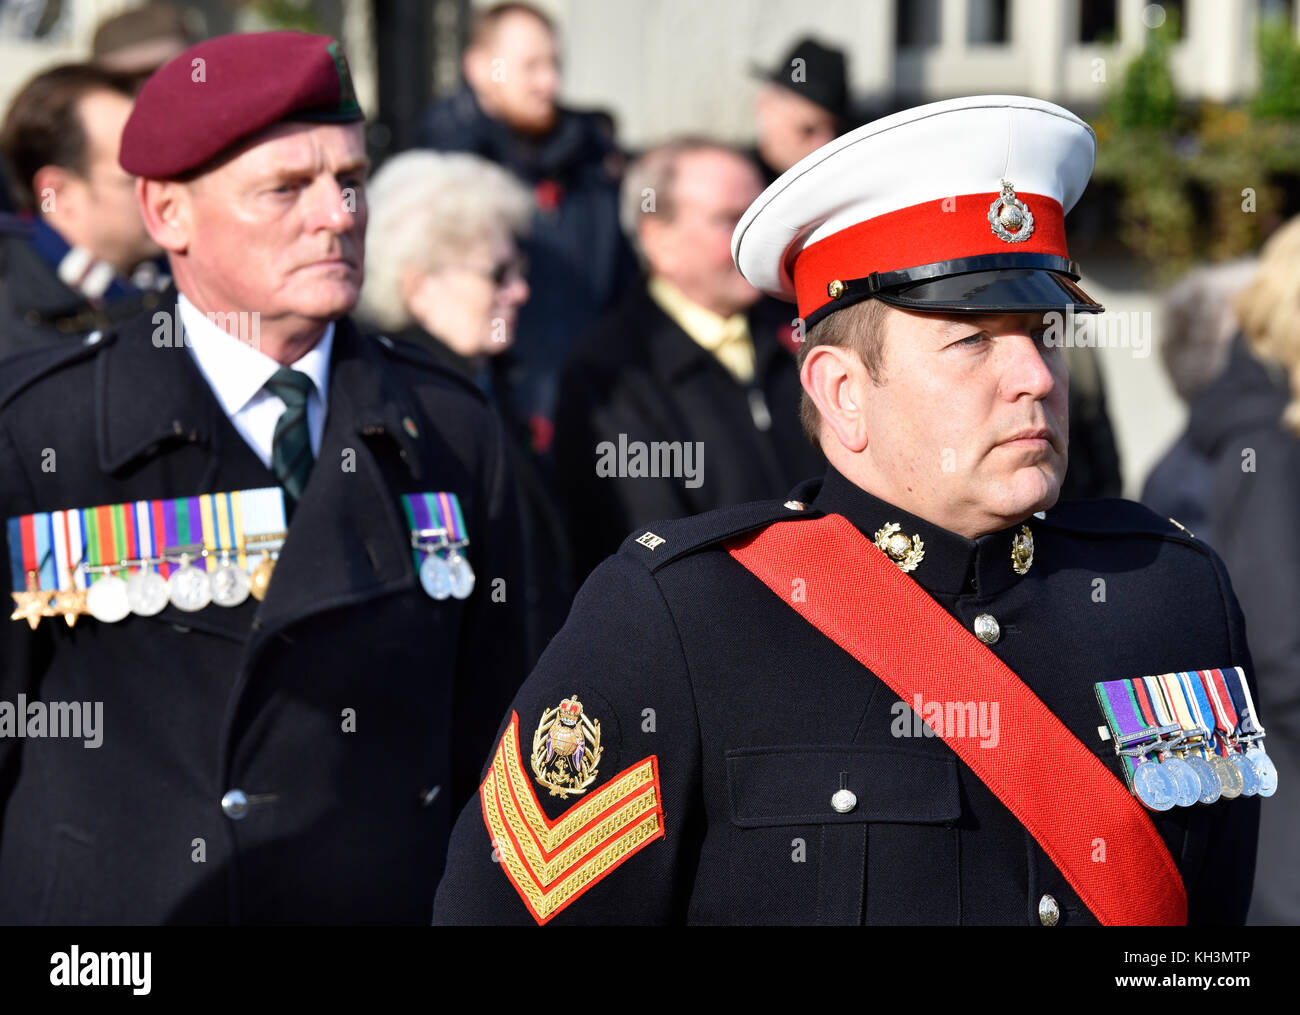 Armed forces marching during Remembrance Sunday ceremony, High Street, Haslemere, Surrey, UK. Sunday 12th November 2017. Stock Photo